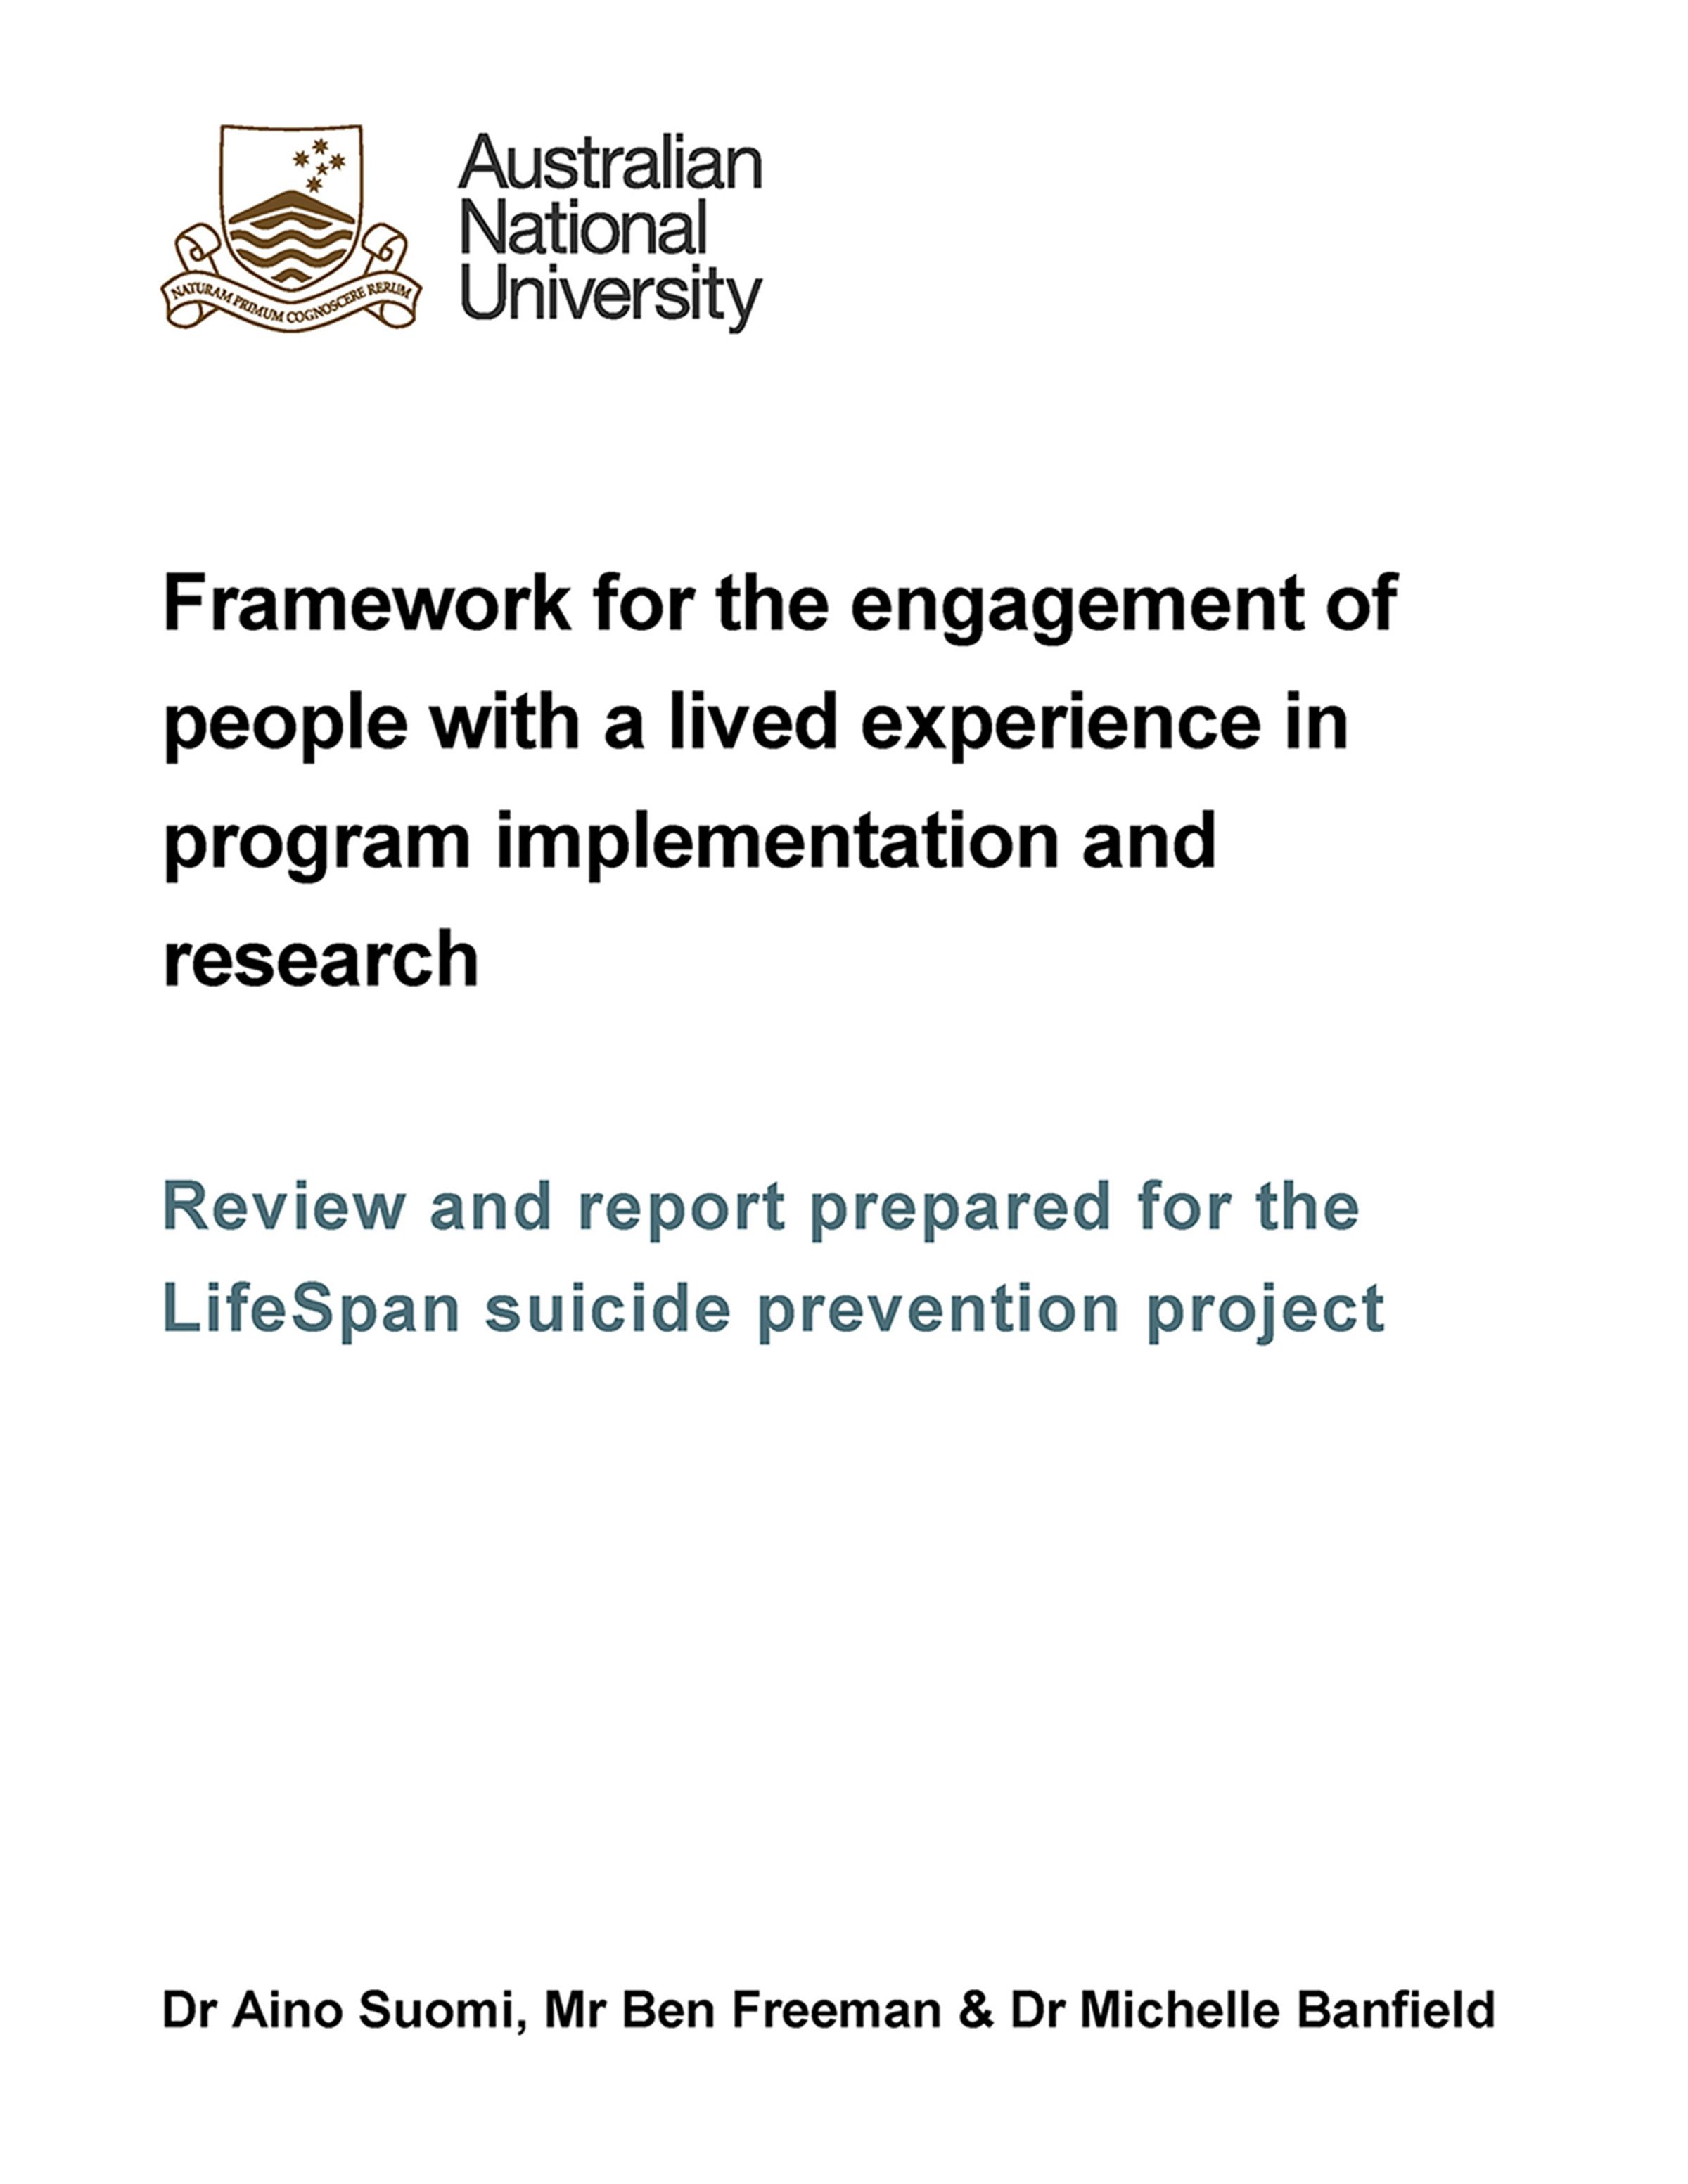 A report cover with an Australian National University logo entitled Framework for the engagement of people with a lived experience in program implementation and research: review and report prepared for the LifeSpan suicide prevention project